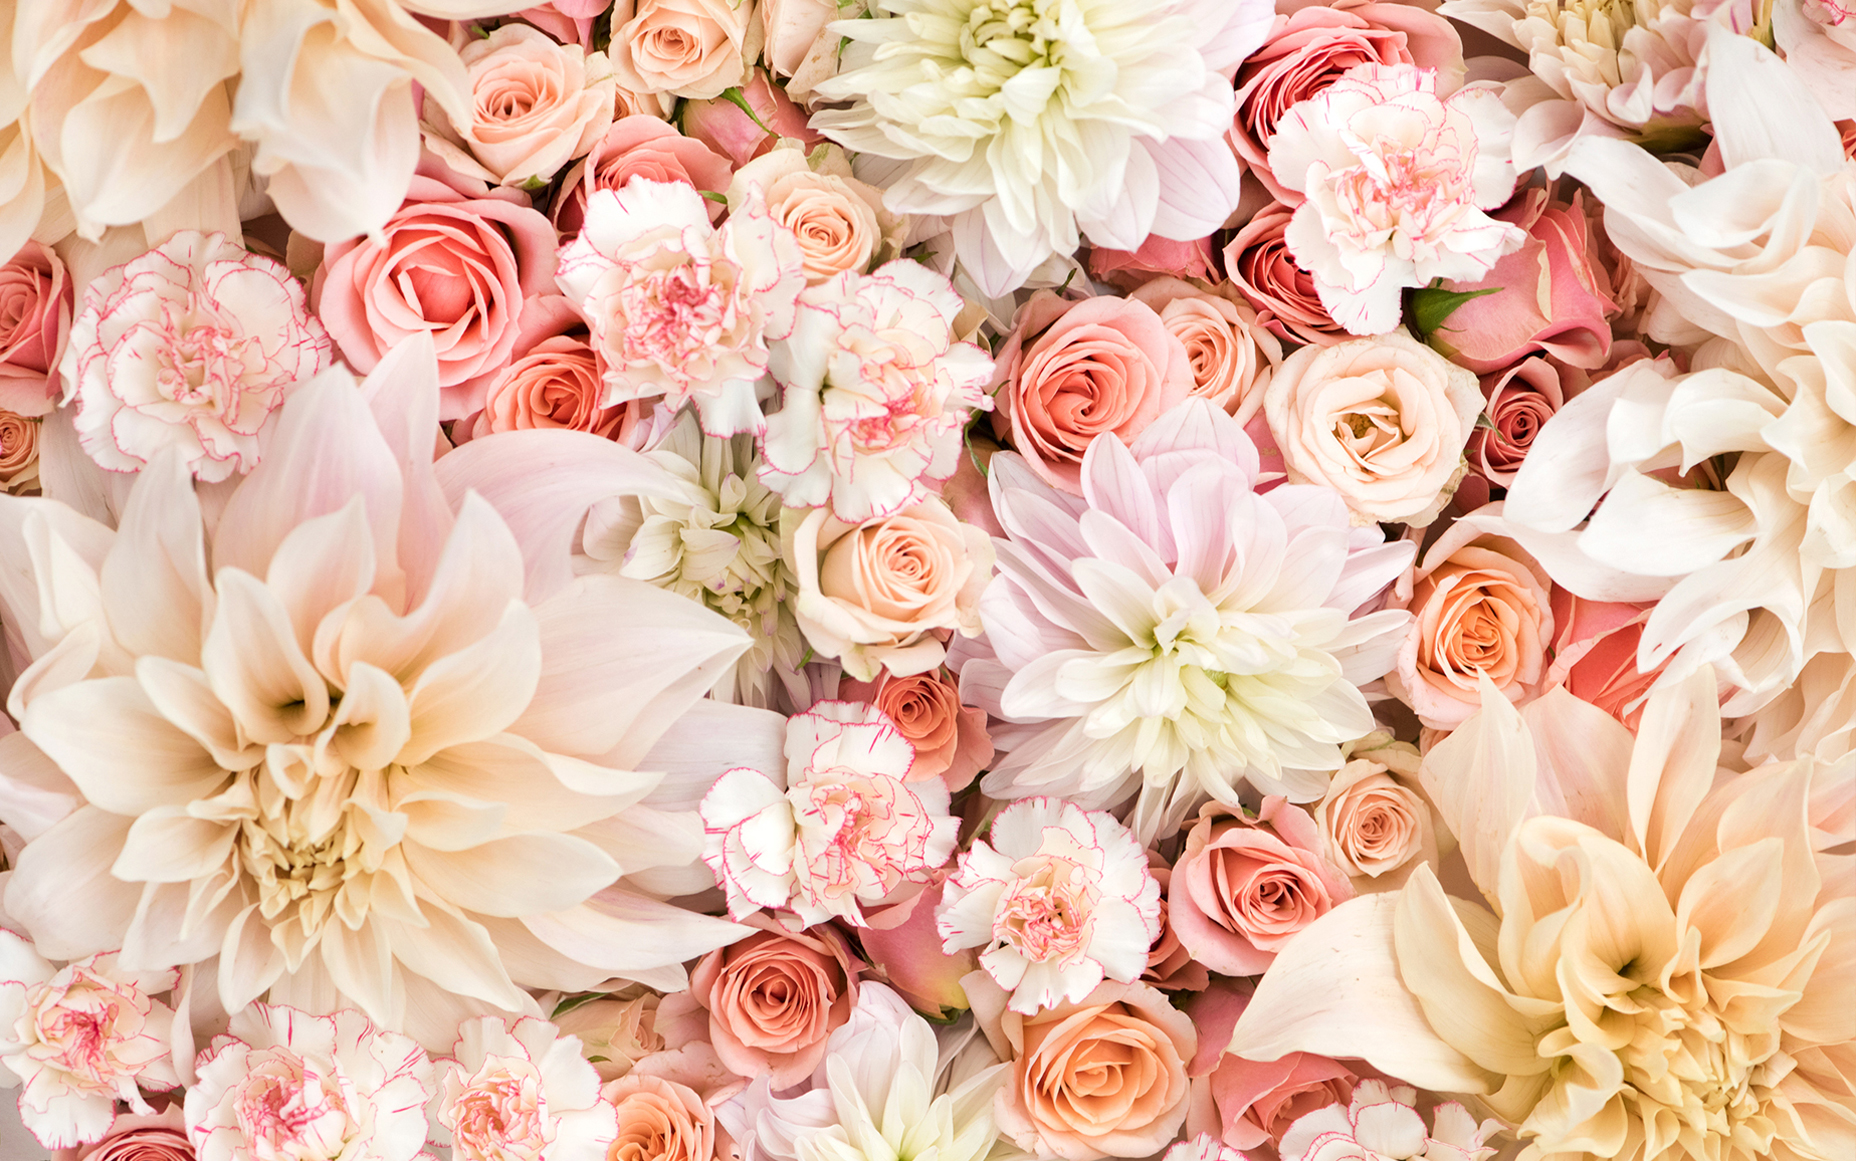 Dahlias, Roses, and Carnations in Pastels Wallpaper